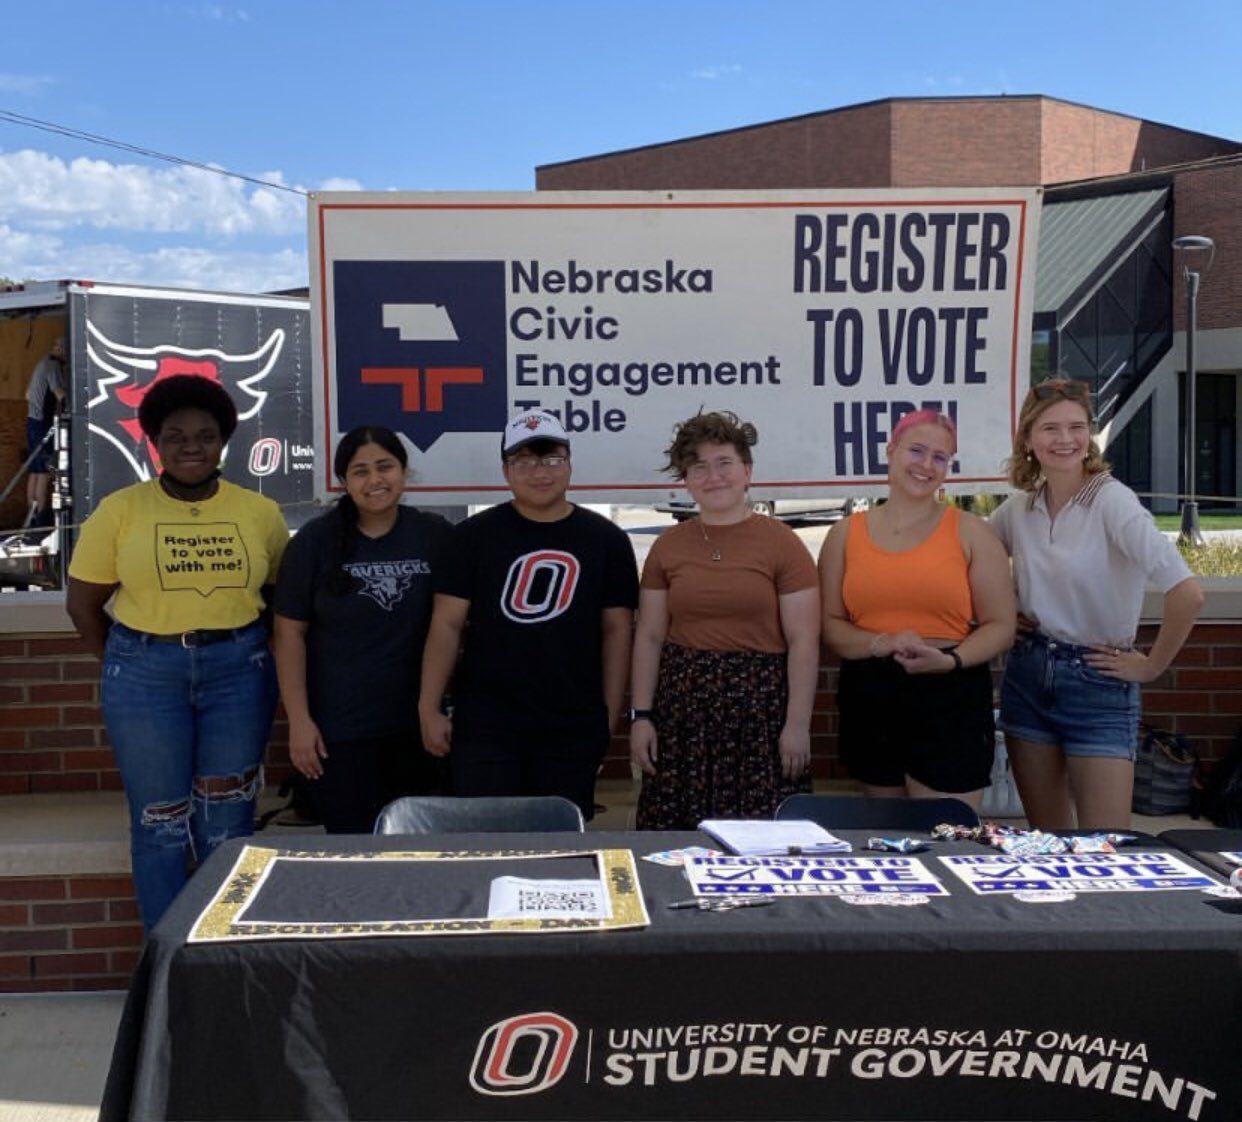 Organizers and advocates with Nebraska Civic Engagement Table helping register college students to vote.